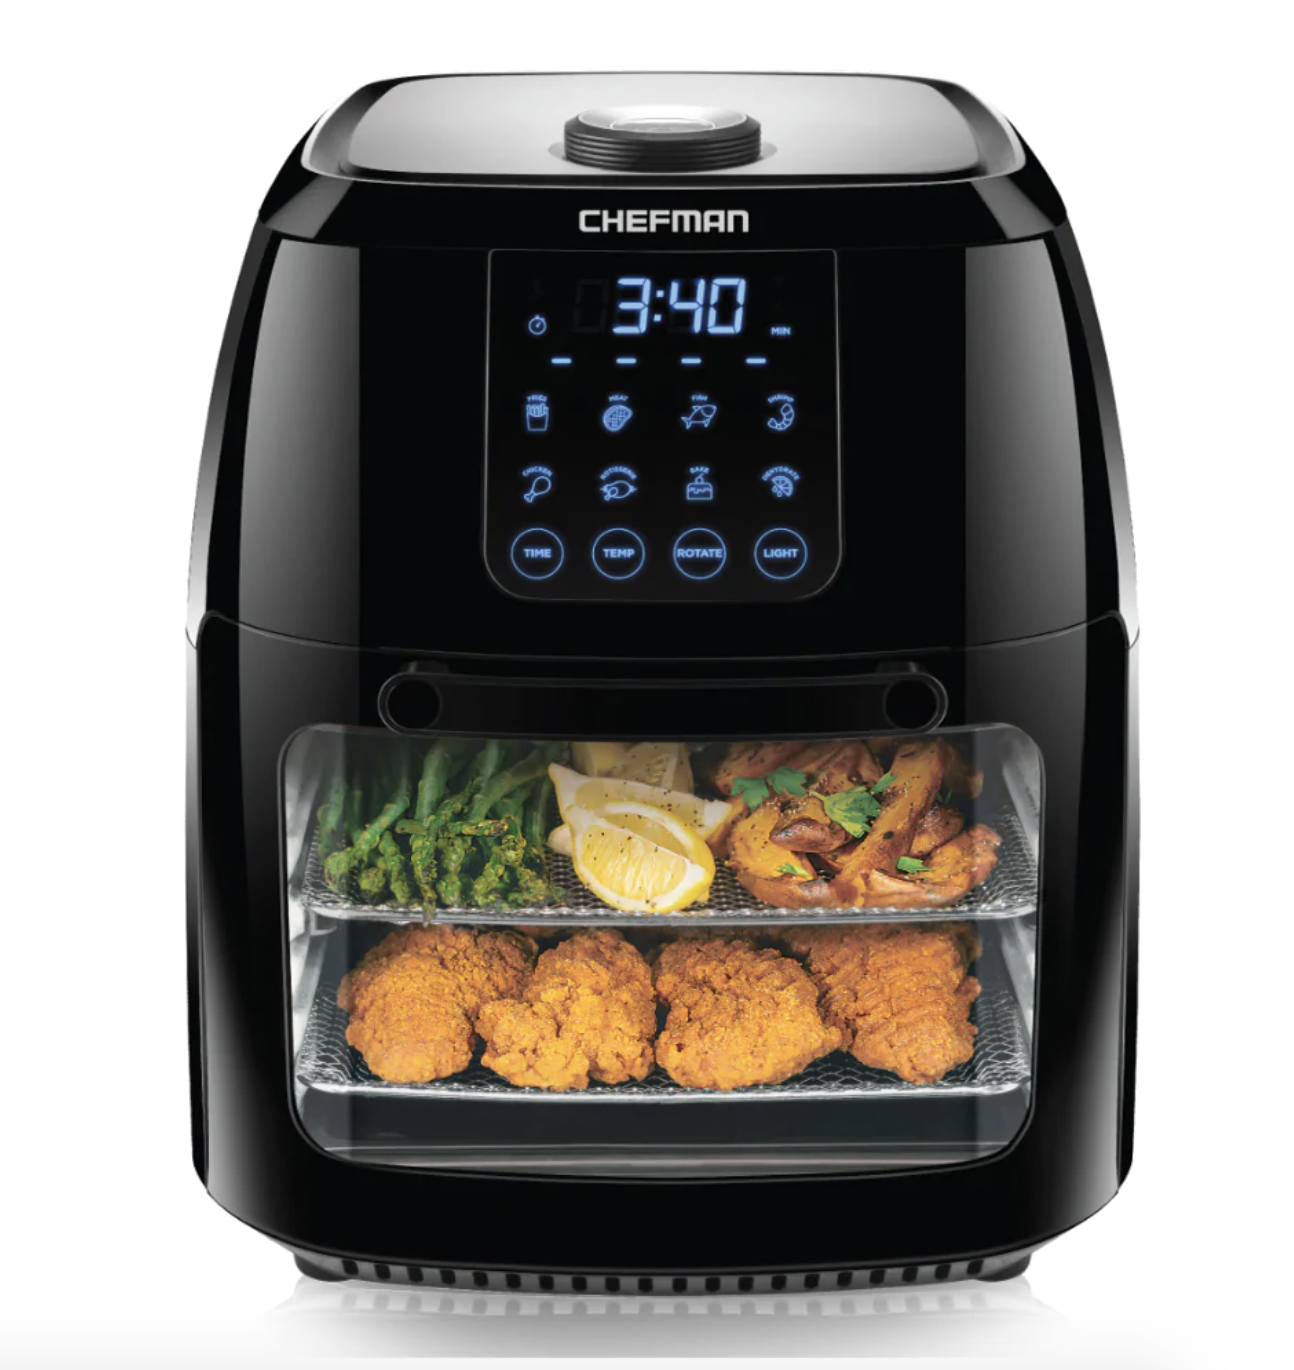 The air fryer with two racks